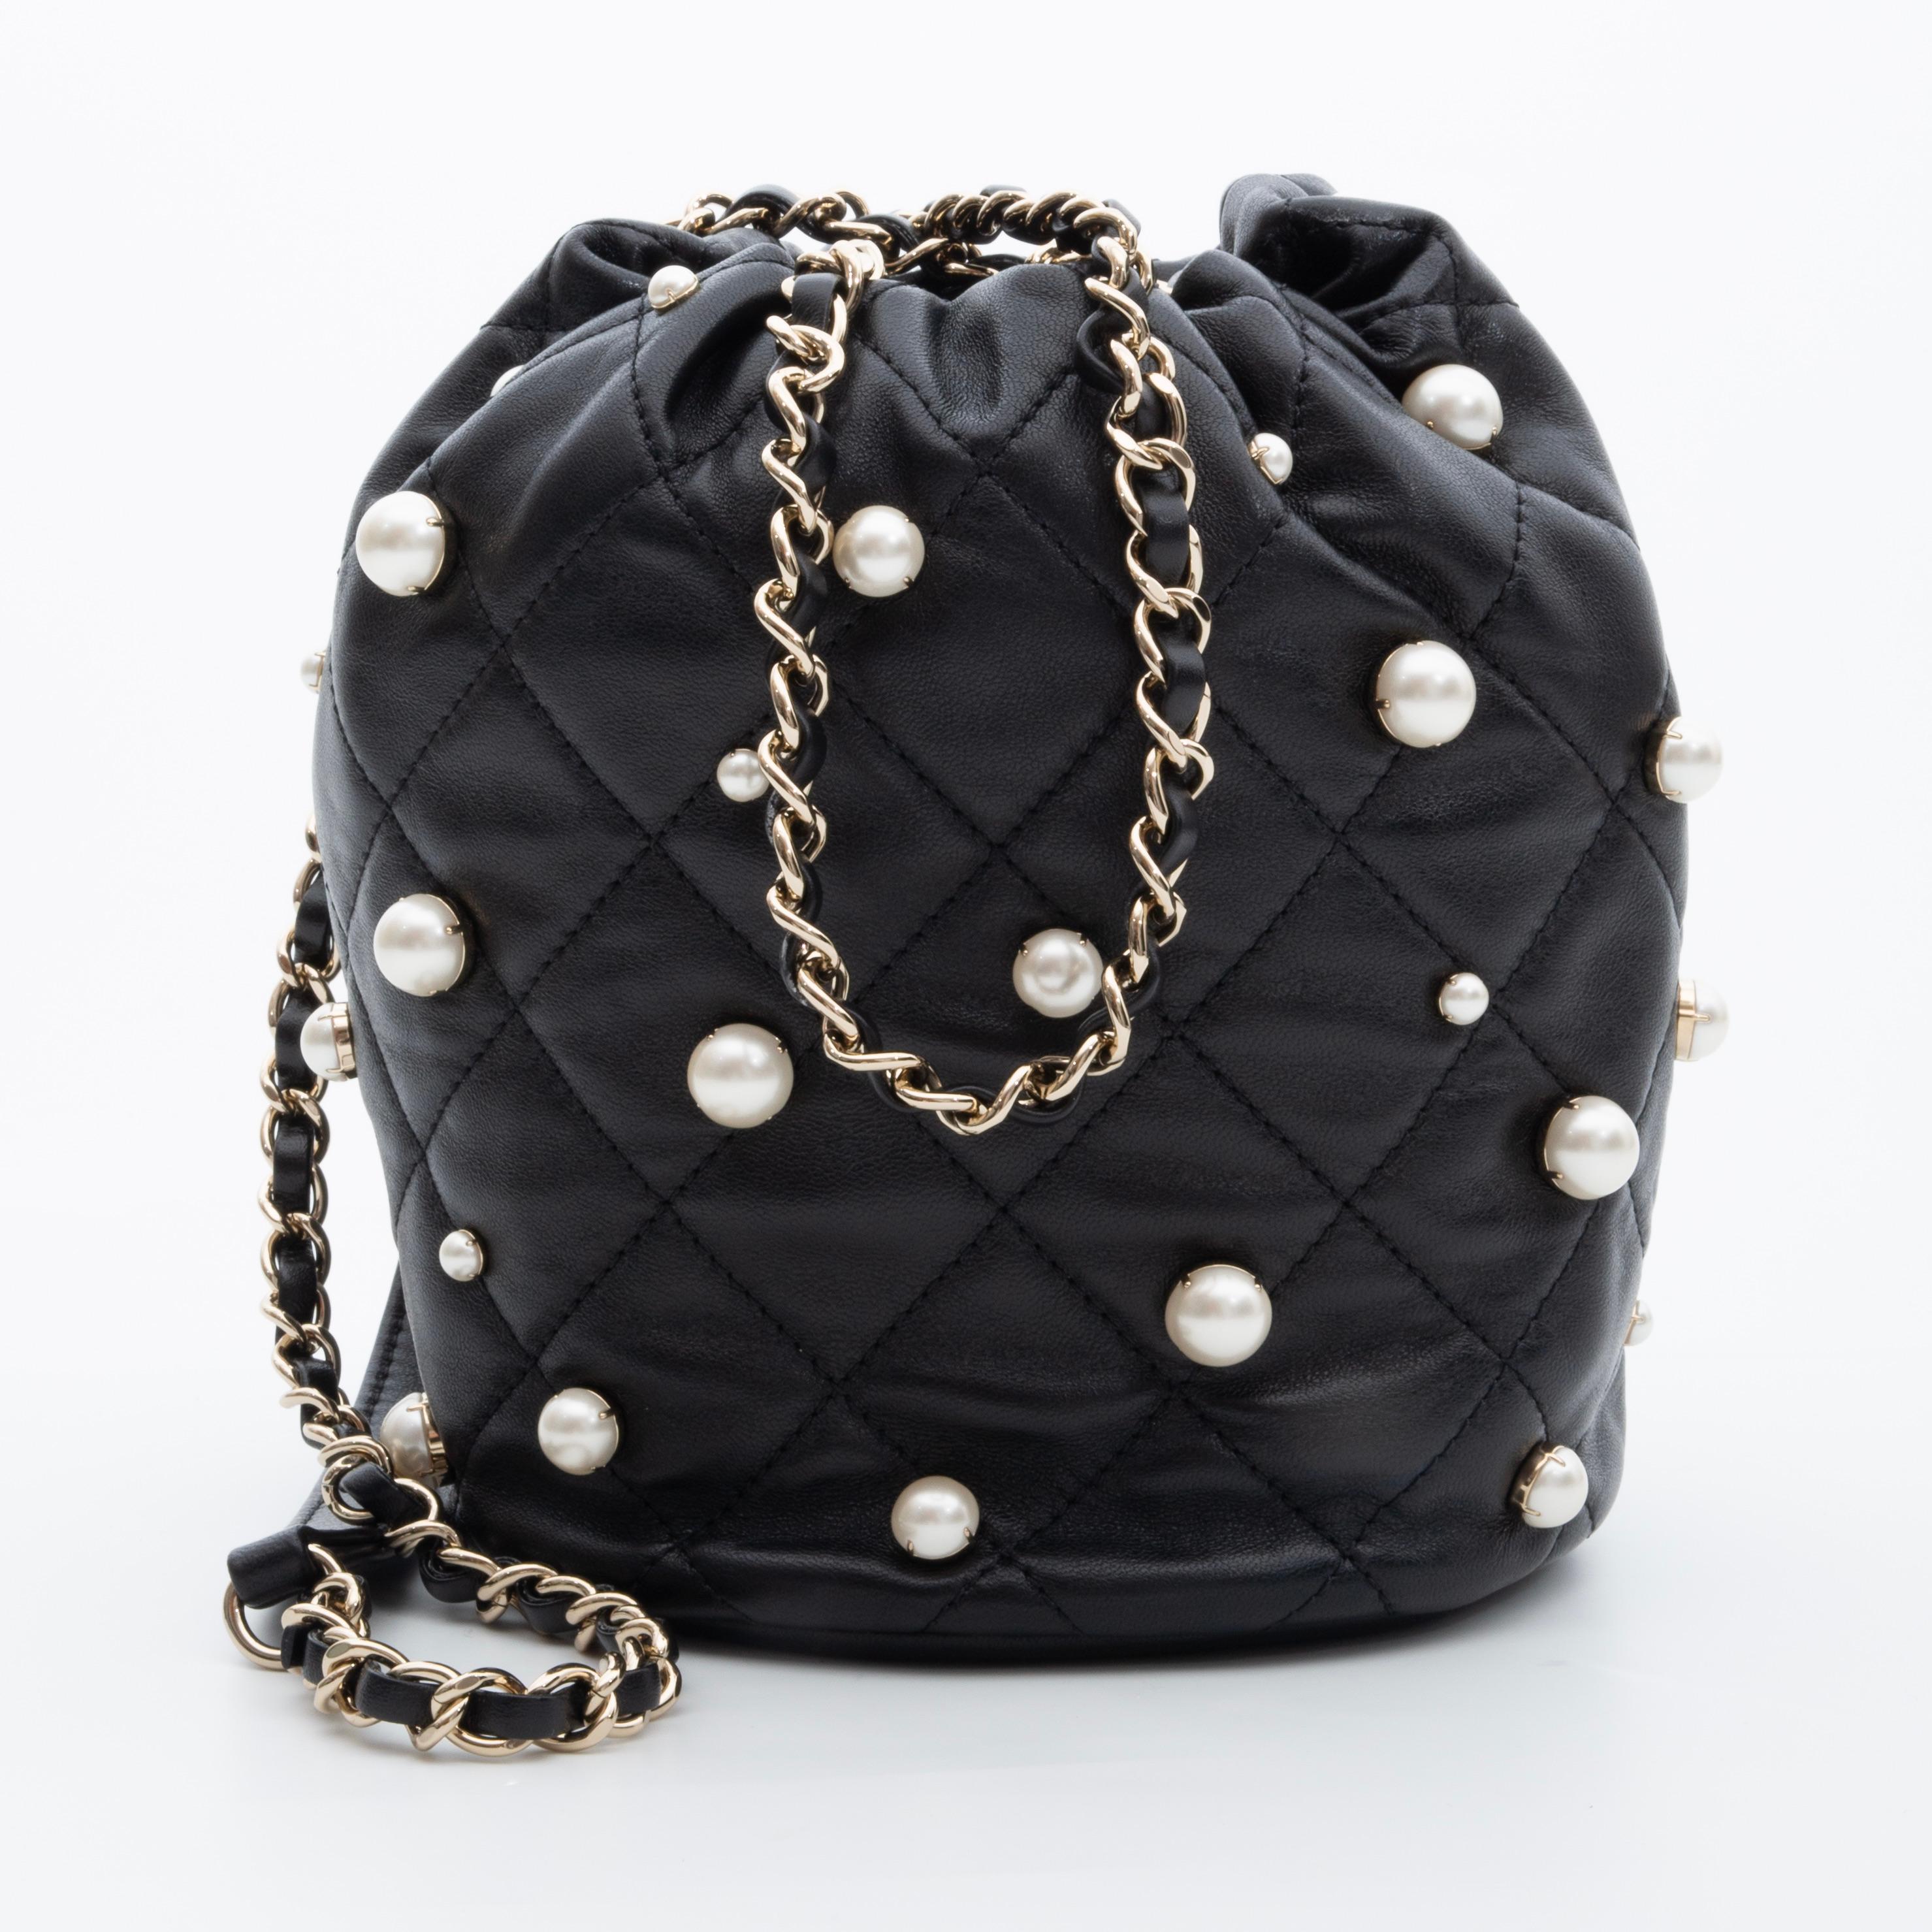 From the Spring/Summer 2021 collection. This limited Edition Chanel bag is made with lambskin leather with diamond quilting in black. The bag features pearl embellishments, a chain interlaced with leather drawstring pull, metallic CC logo fastener